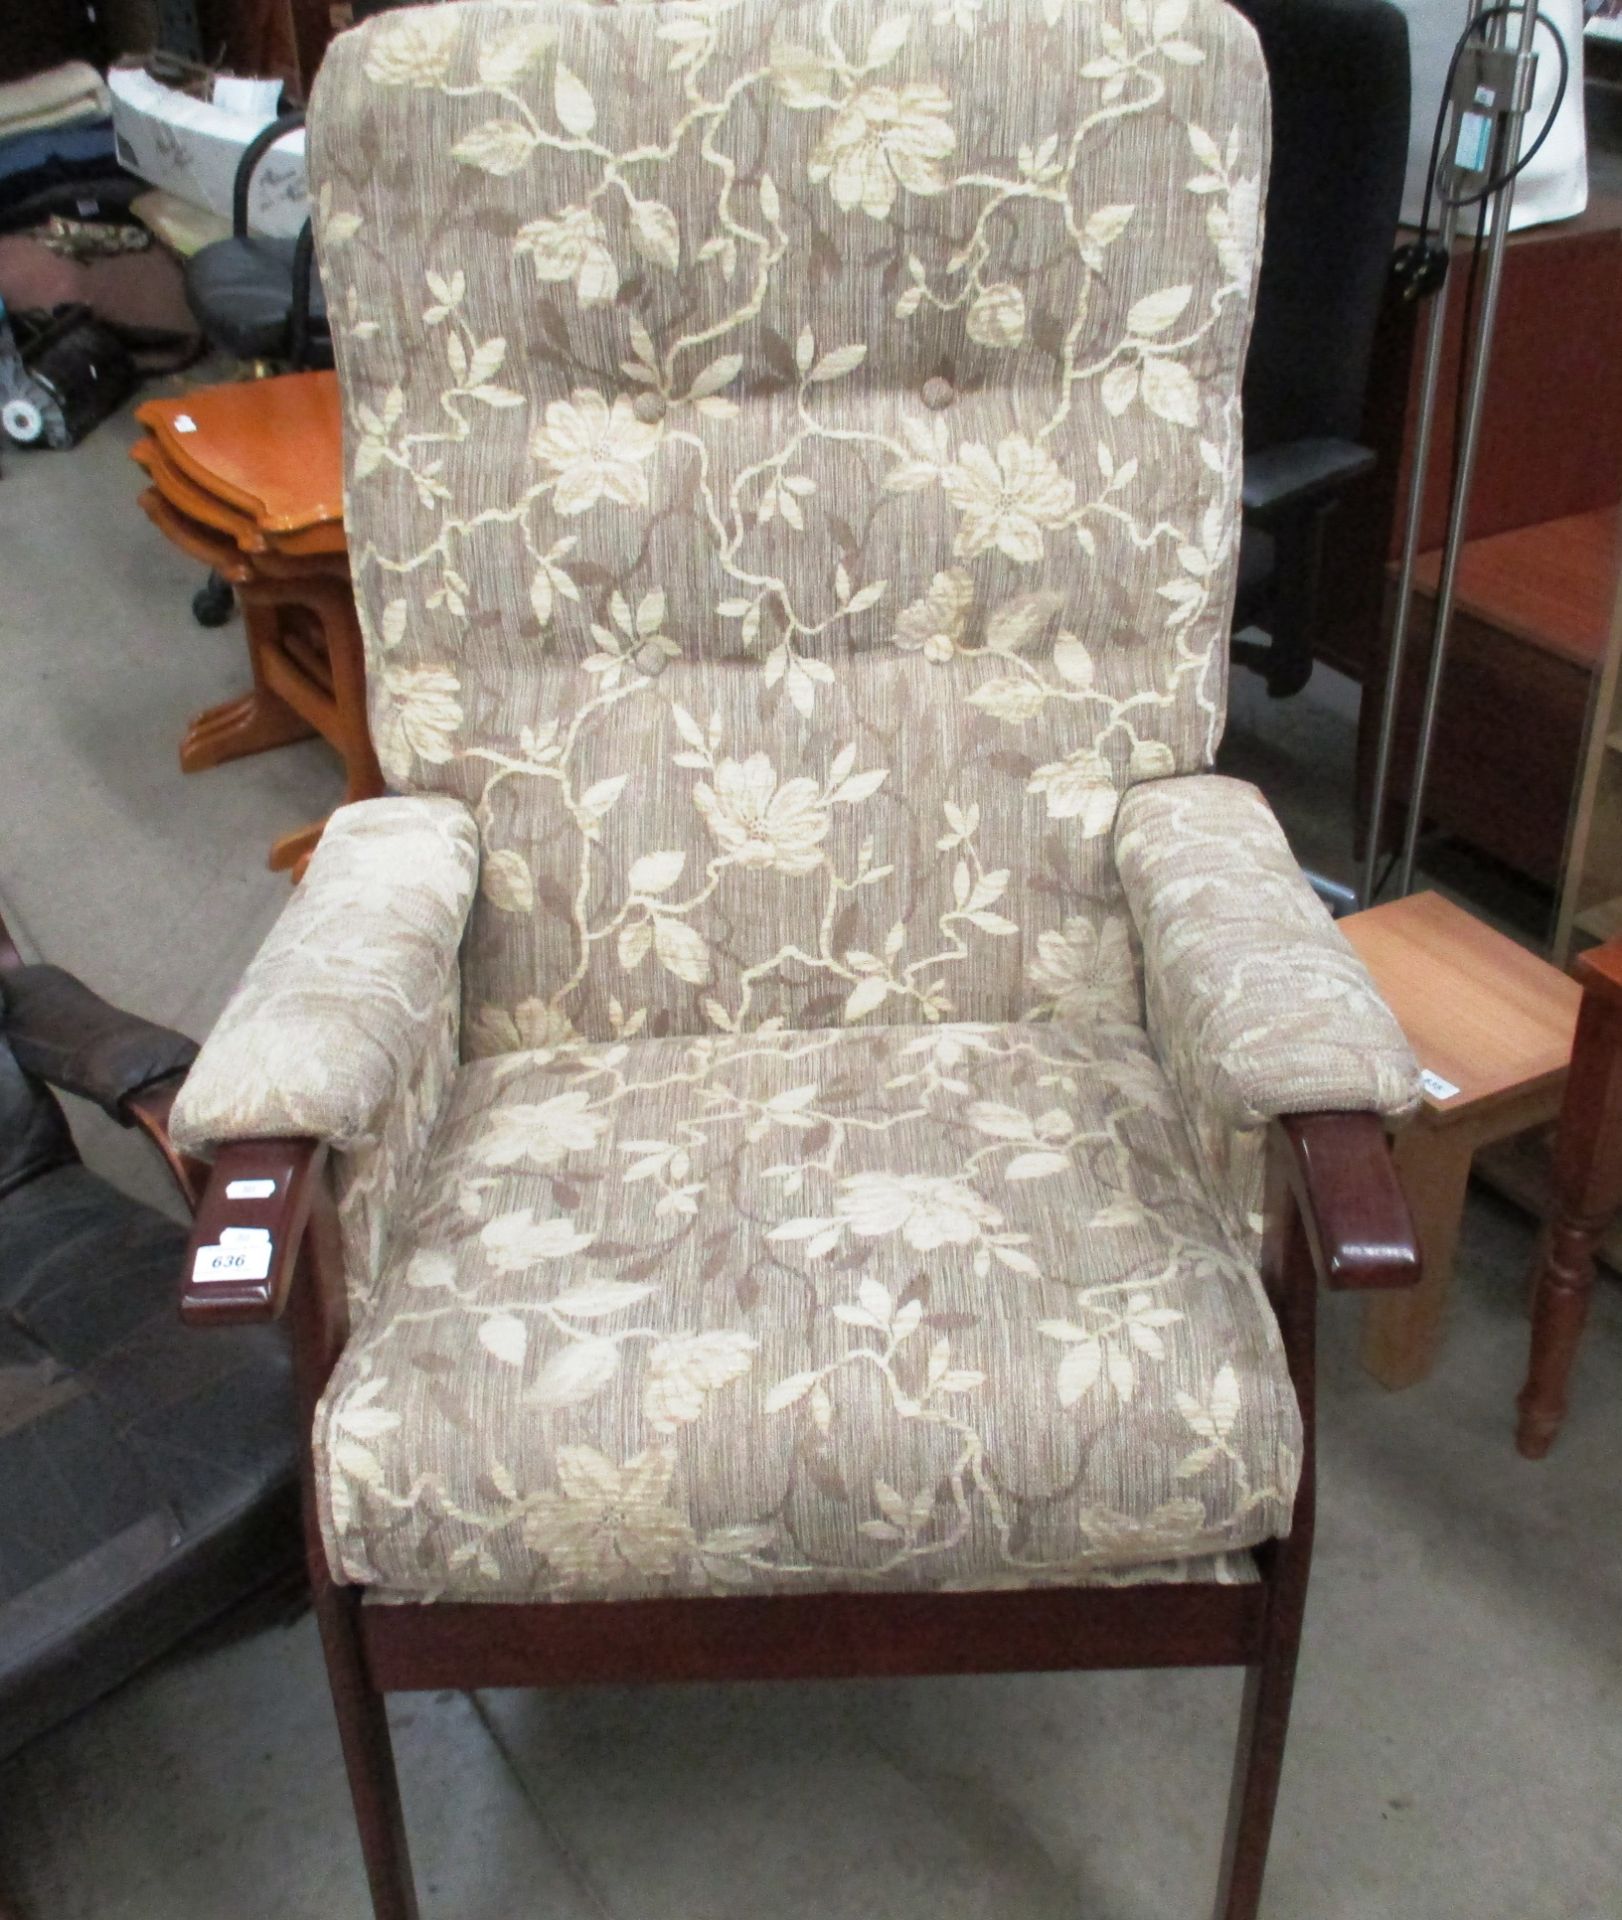 A light brown floral patterned upholstered armchair